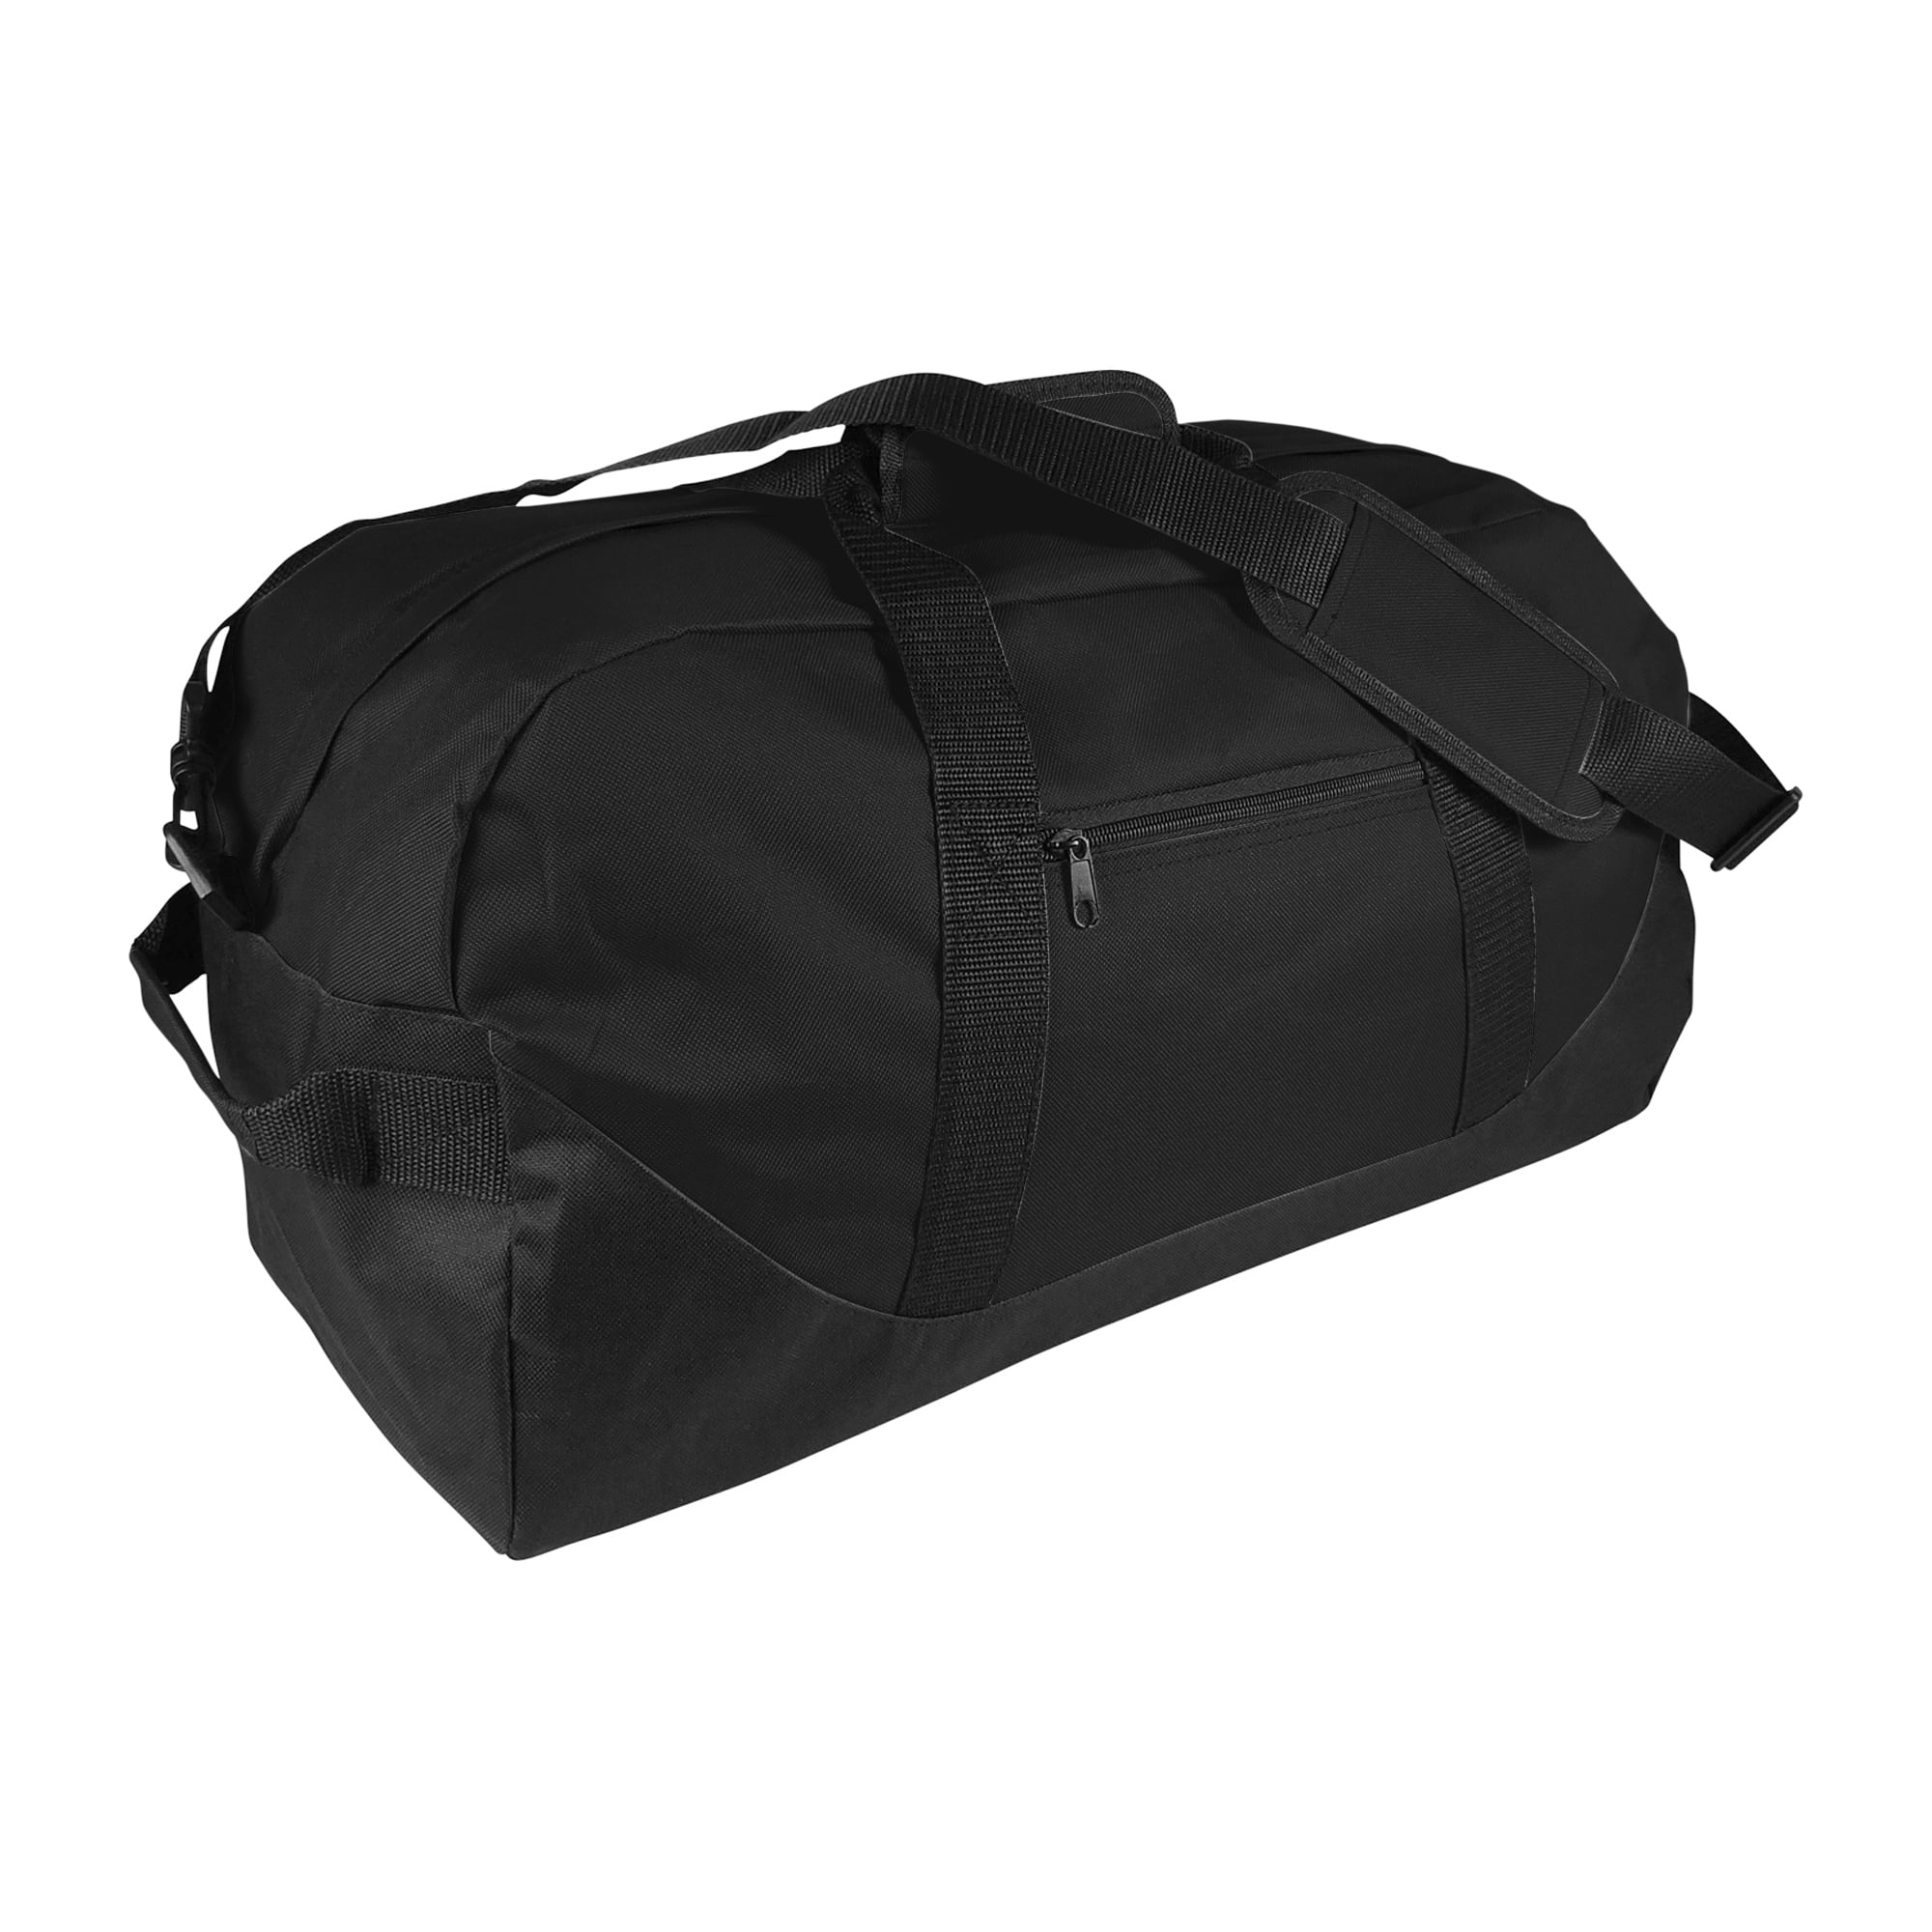 21 Large Duffle Bag with Adjustable Strap 